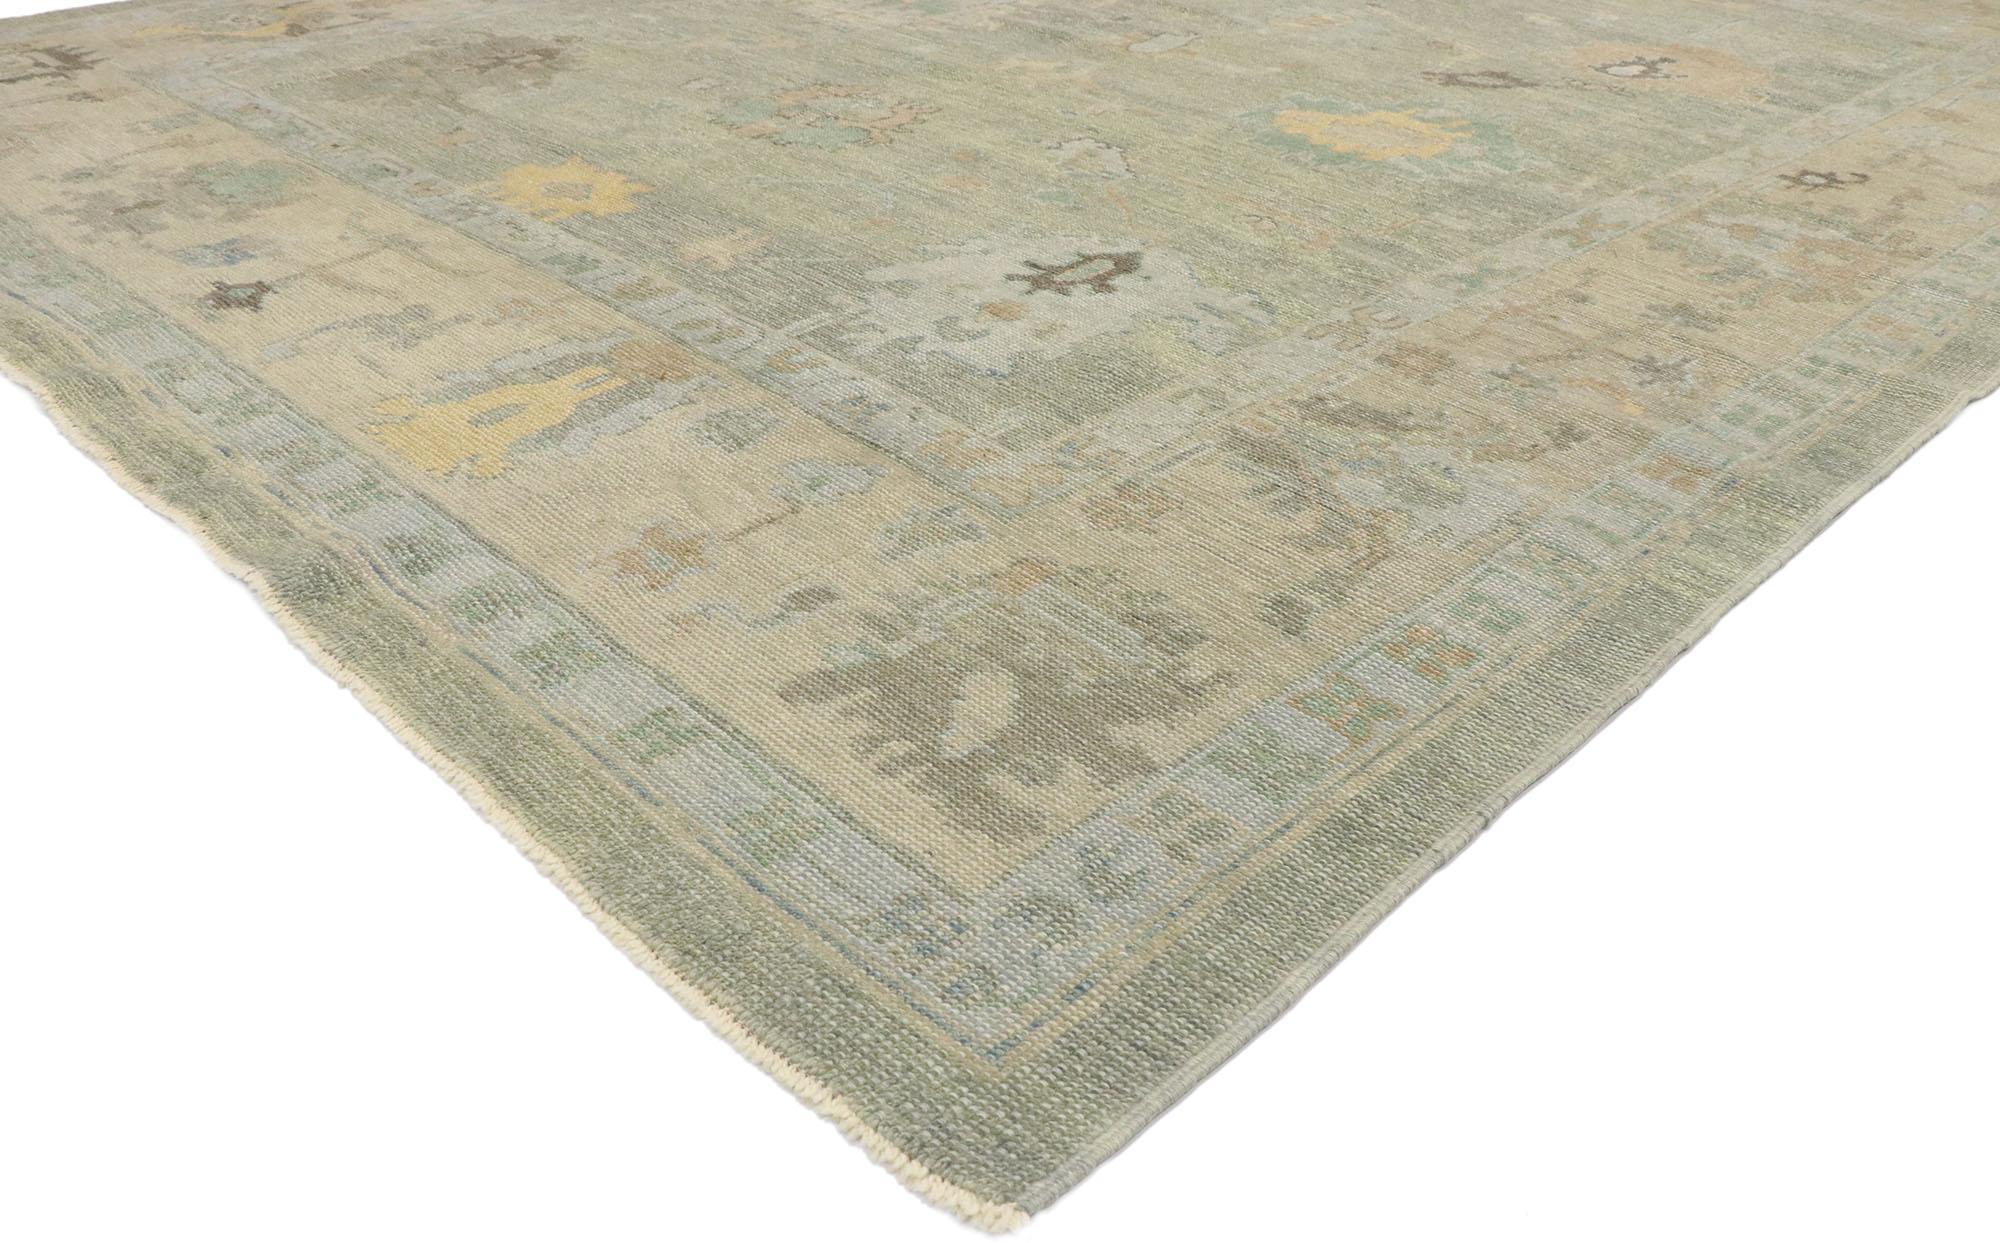 53407, new Contemporary Turkish Oushak rug with Modern Coastal Colonial style. Blending elements from the modern world with soft colors, this hand knotted wool contemporary Turkish Oushak rug will boost the coziness factor in nearly any space. It